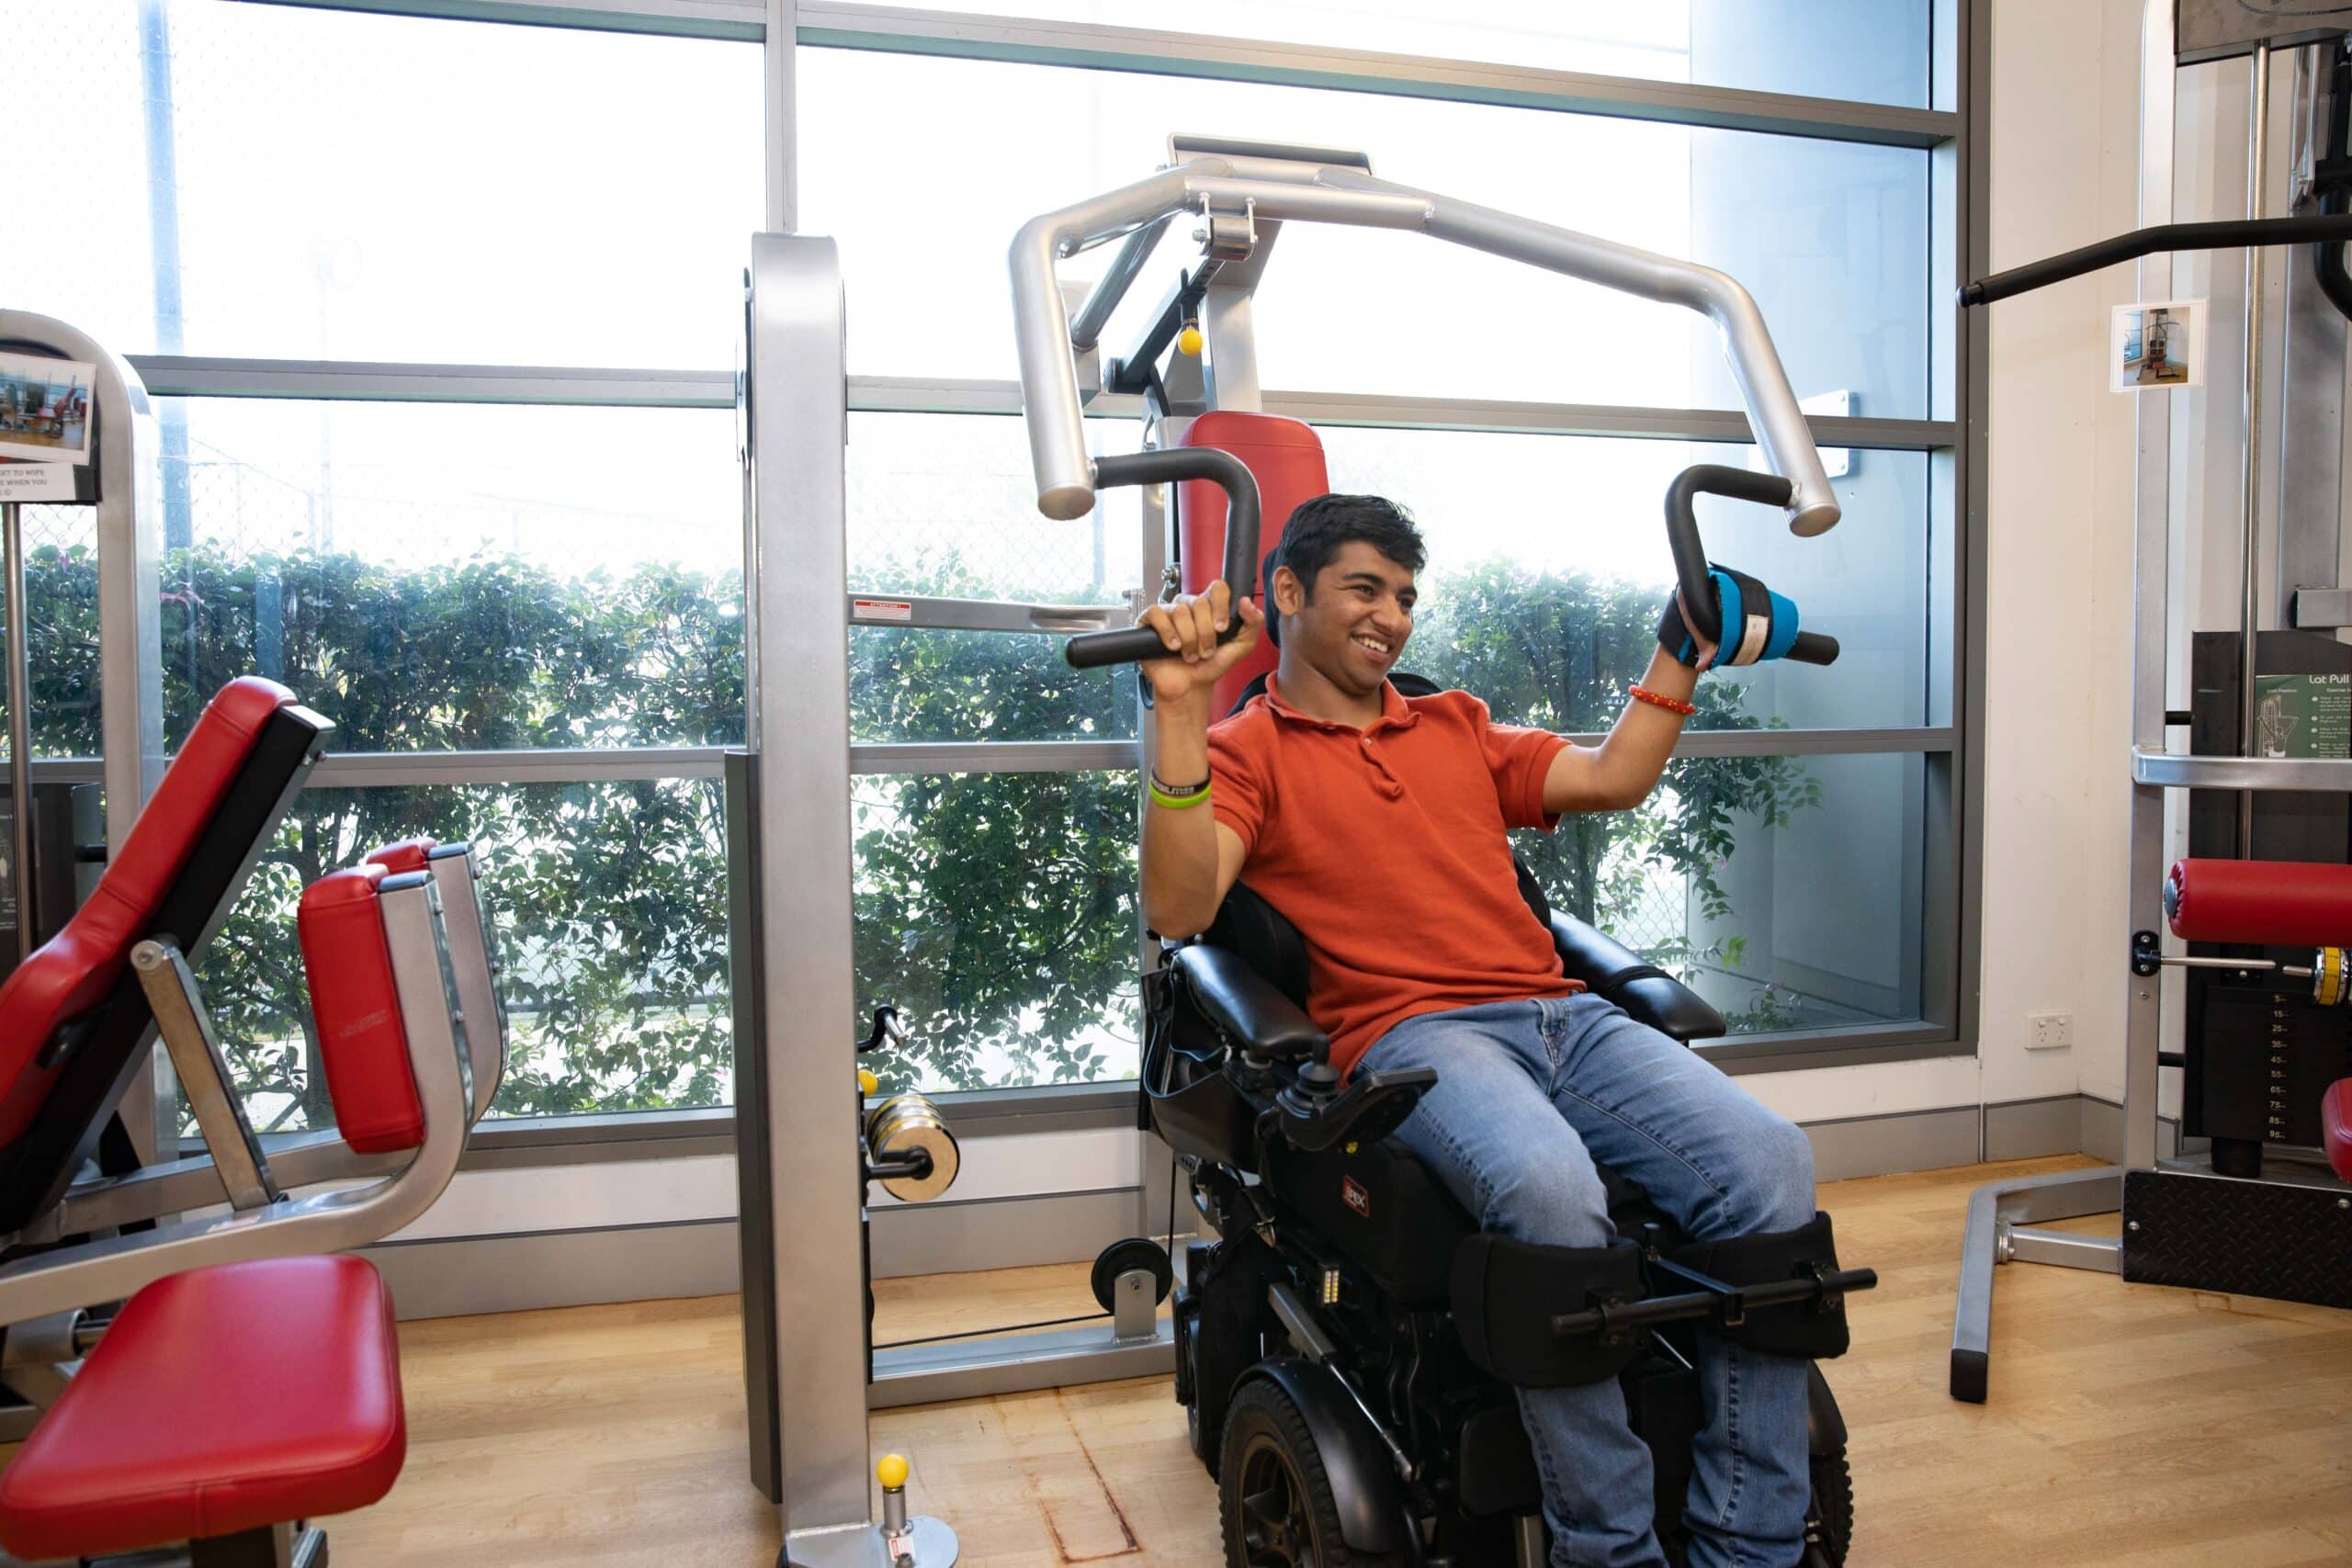 Aaryan Shah using exercise equipment in a gym